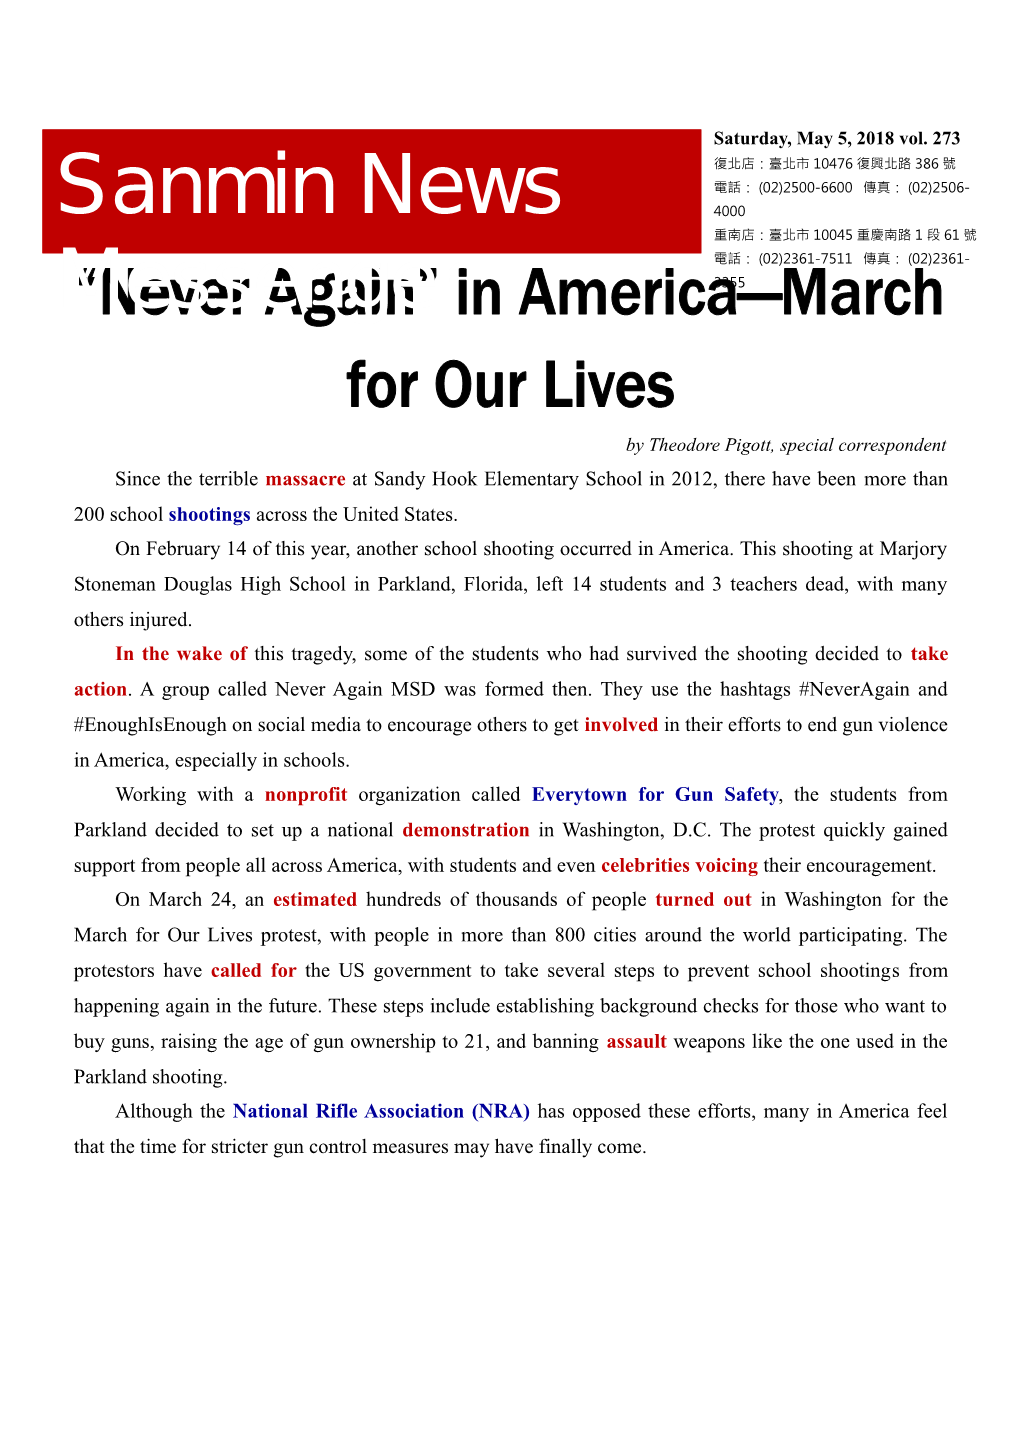 Never Again in America March for Our Lives